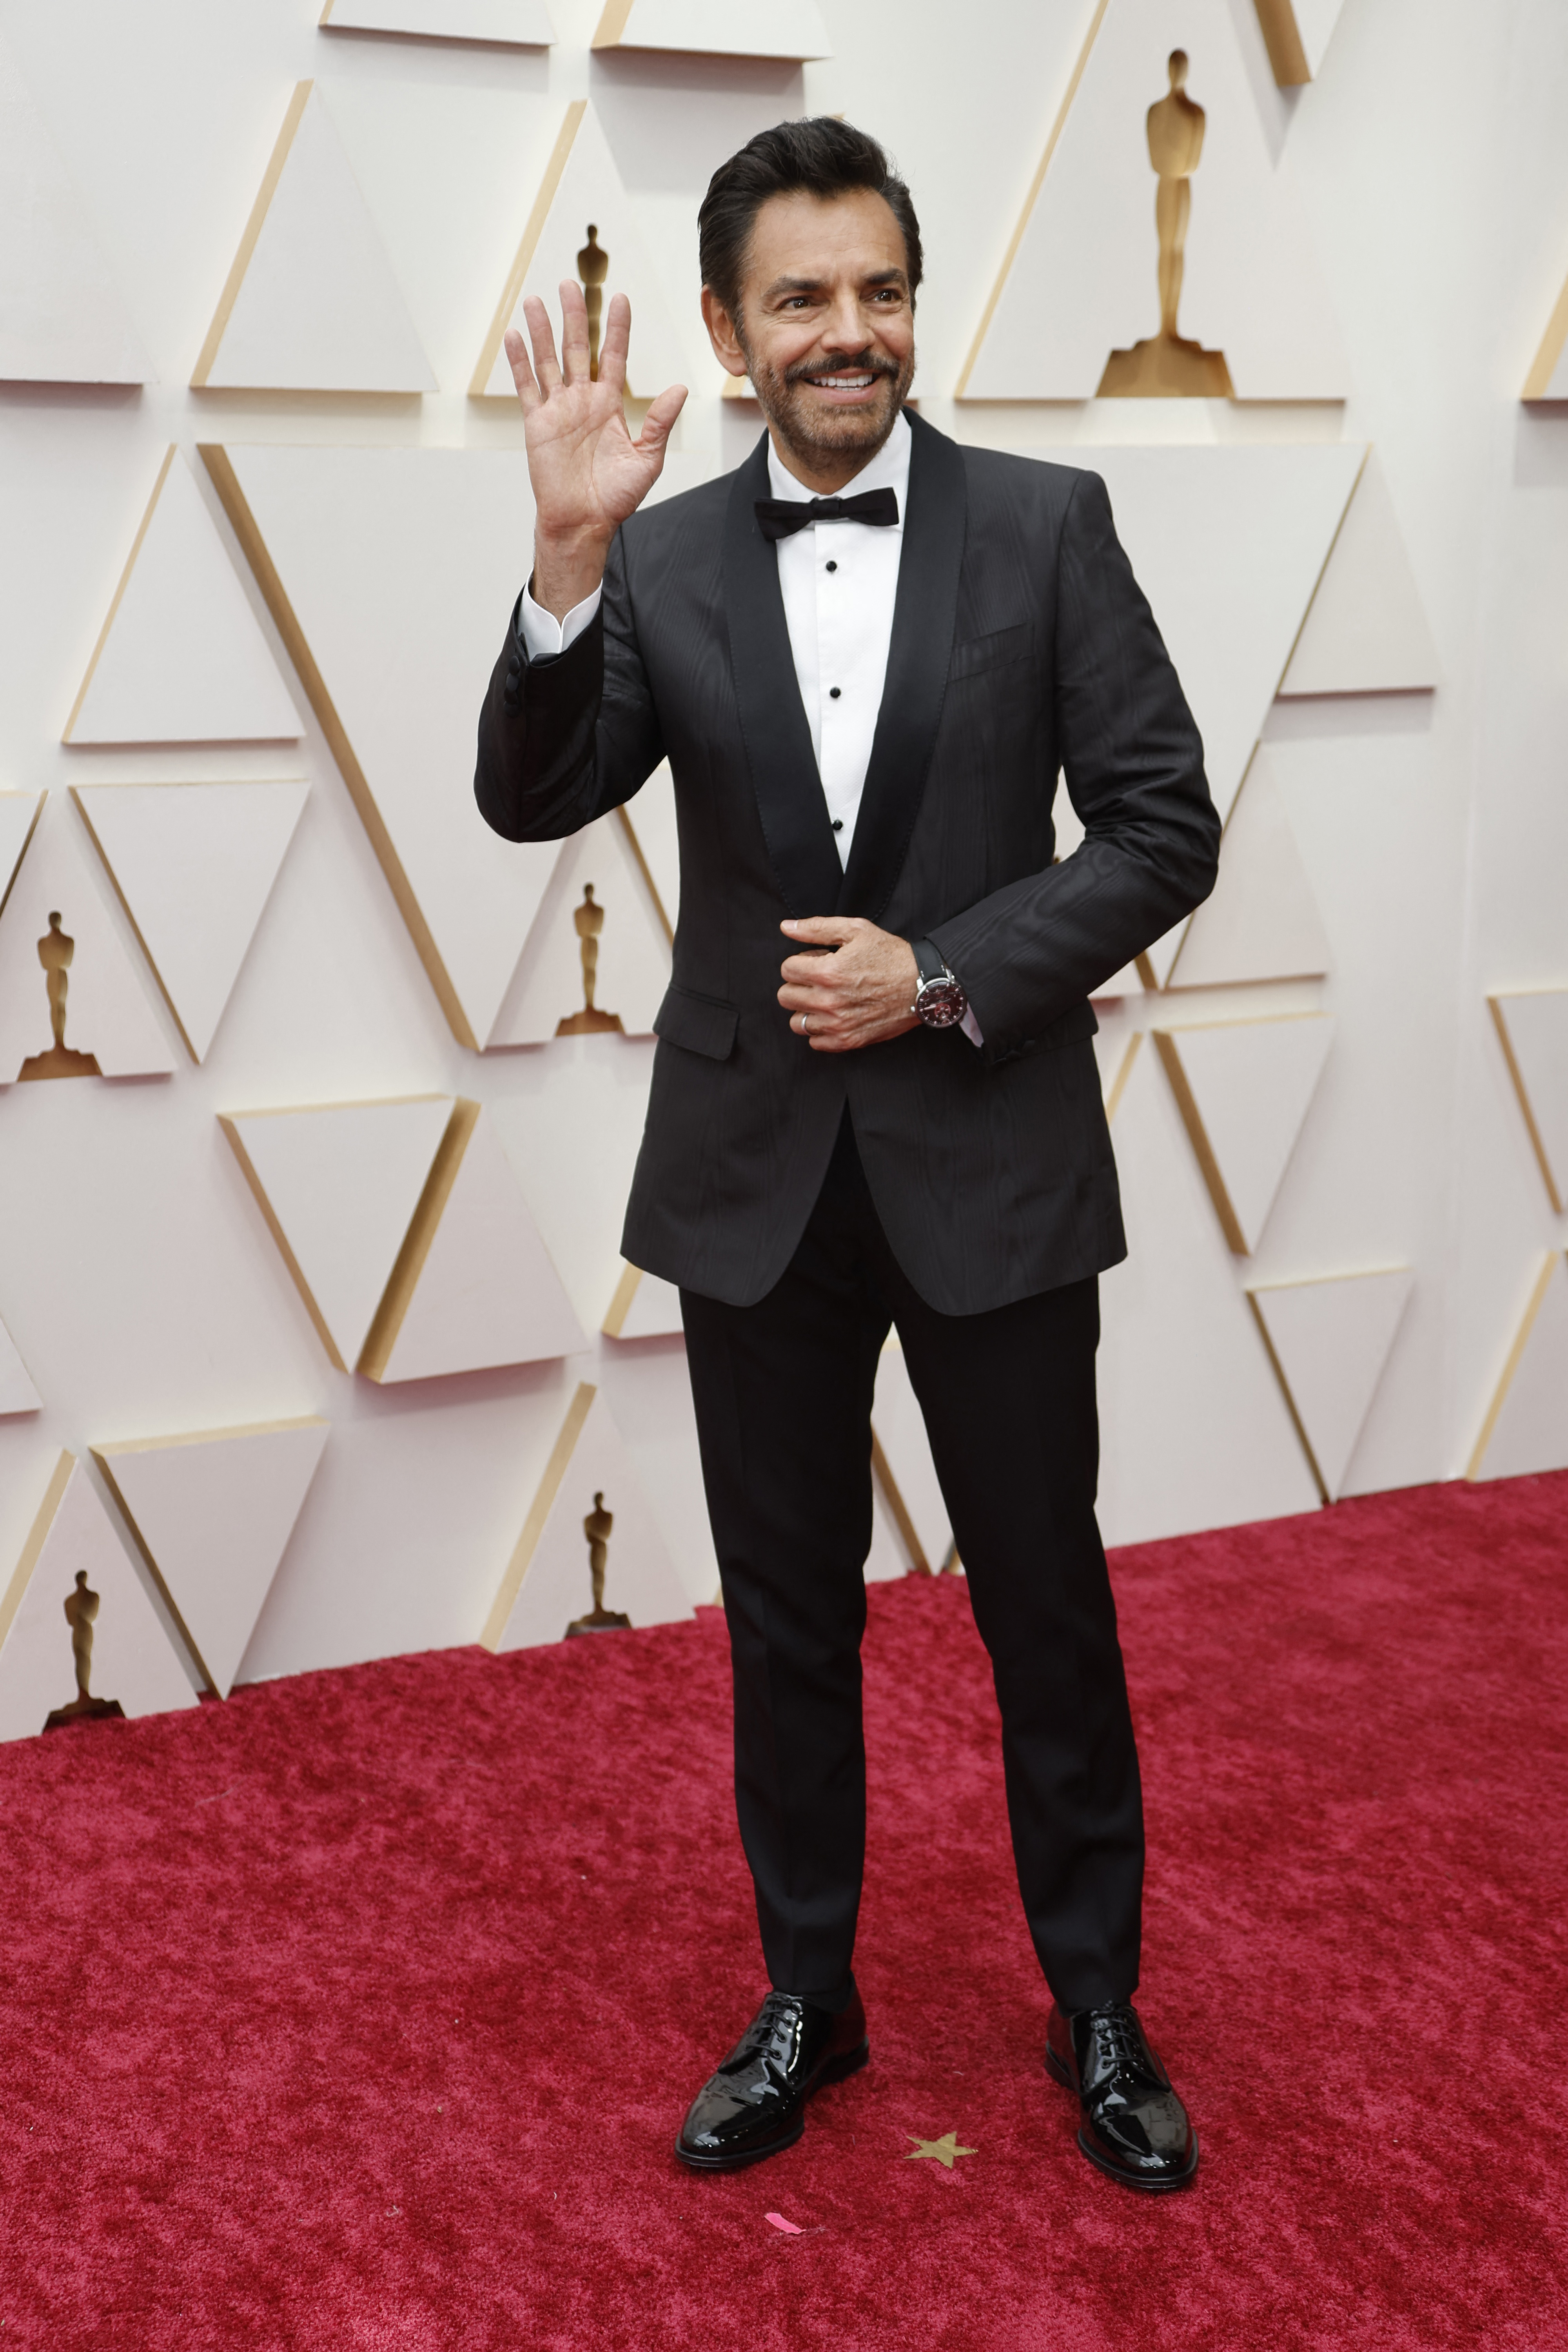 Eugenio Derbez poses on the red carpet during the Oscars arrivals at the 94th Academy Awards in Hollywood, Los Angeles, California, U.S., March 27, 2022. REUTERS/Eric Gaillard